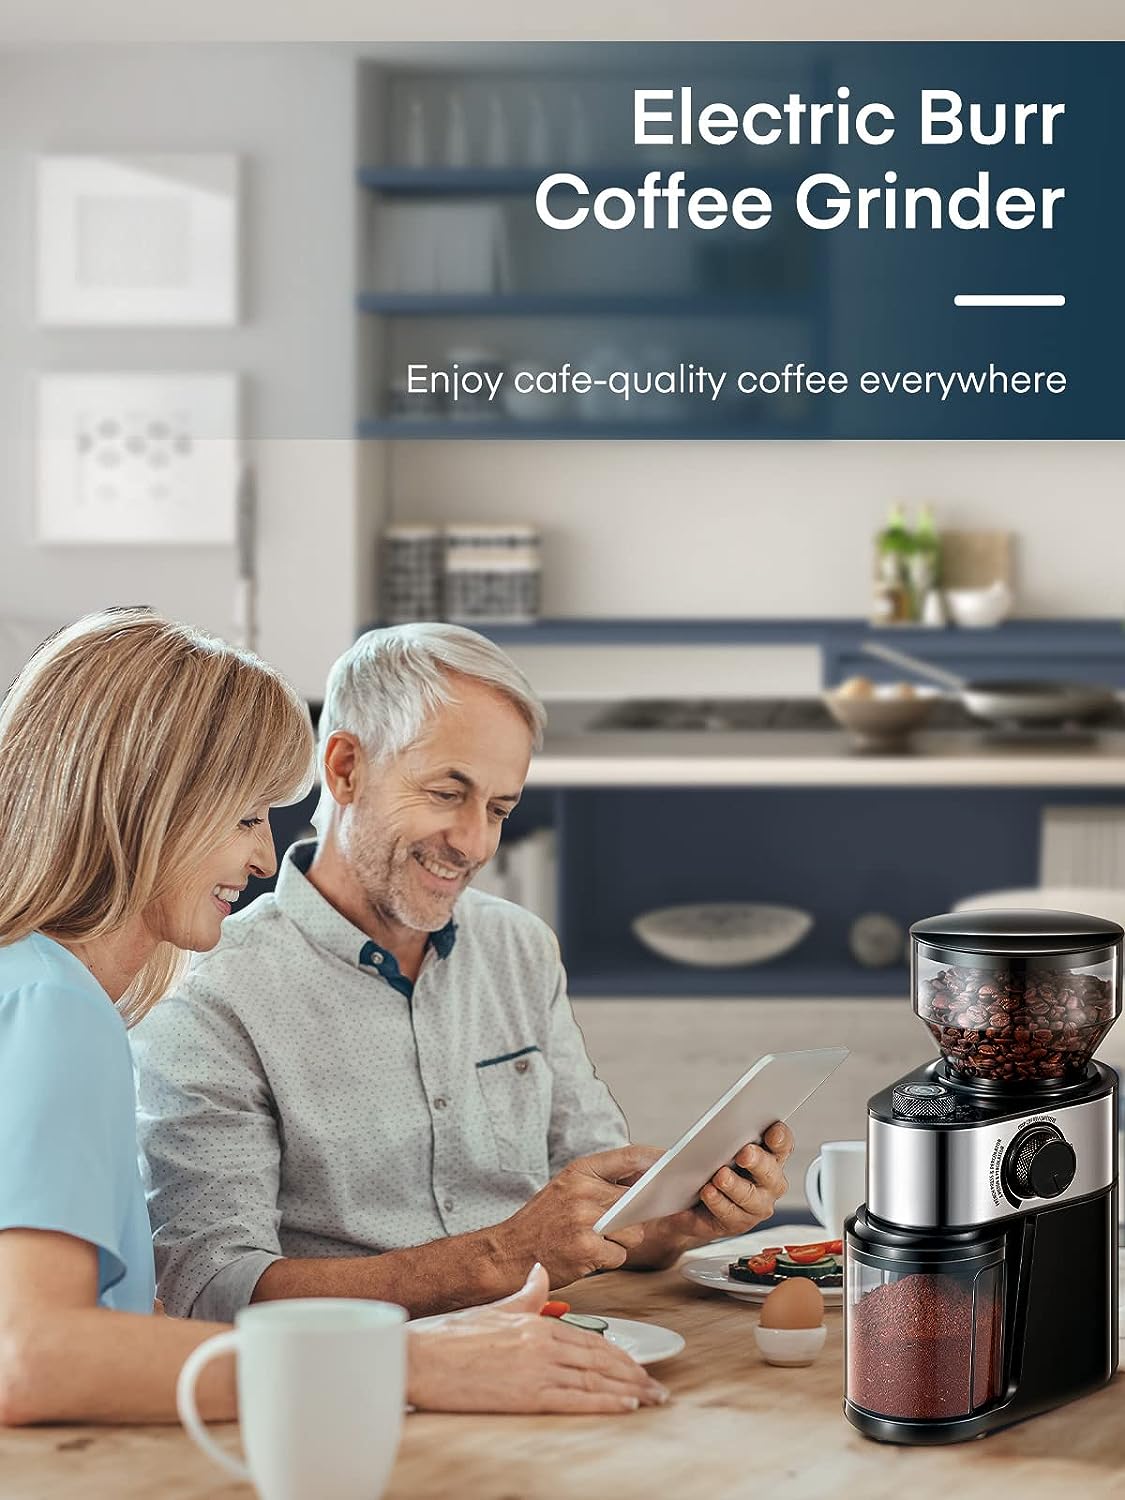 https://bigbigmart.com/wp-content/uploads/2023/10/Electric-Burr-Coffee-Grinder-FOHERE-Coffee-Bean-Grinder-with-18-Precise-Grind-Settings-2-14-Cup-for-Drip-Percolator-French-Press-Espresso-and-Turkish-Electric-Coffee-Makers-Black2.jpg